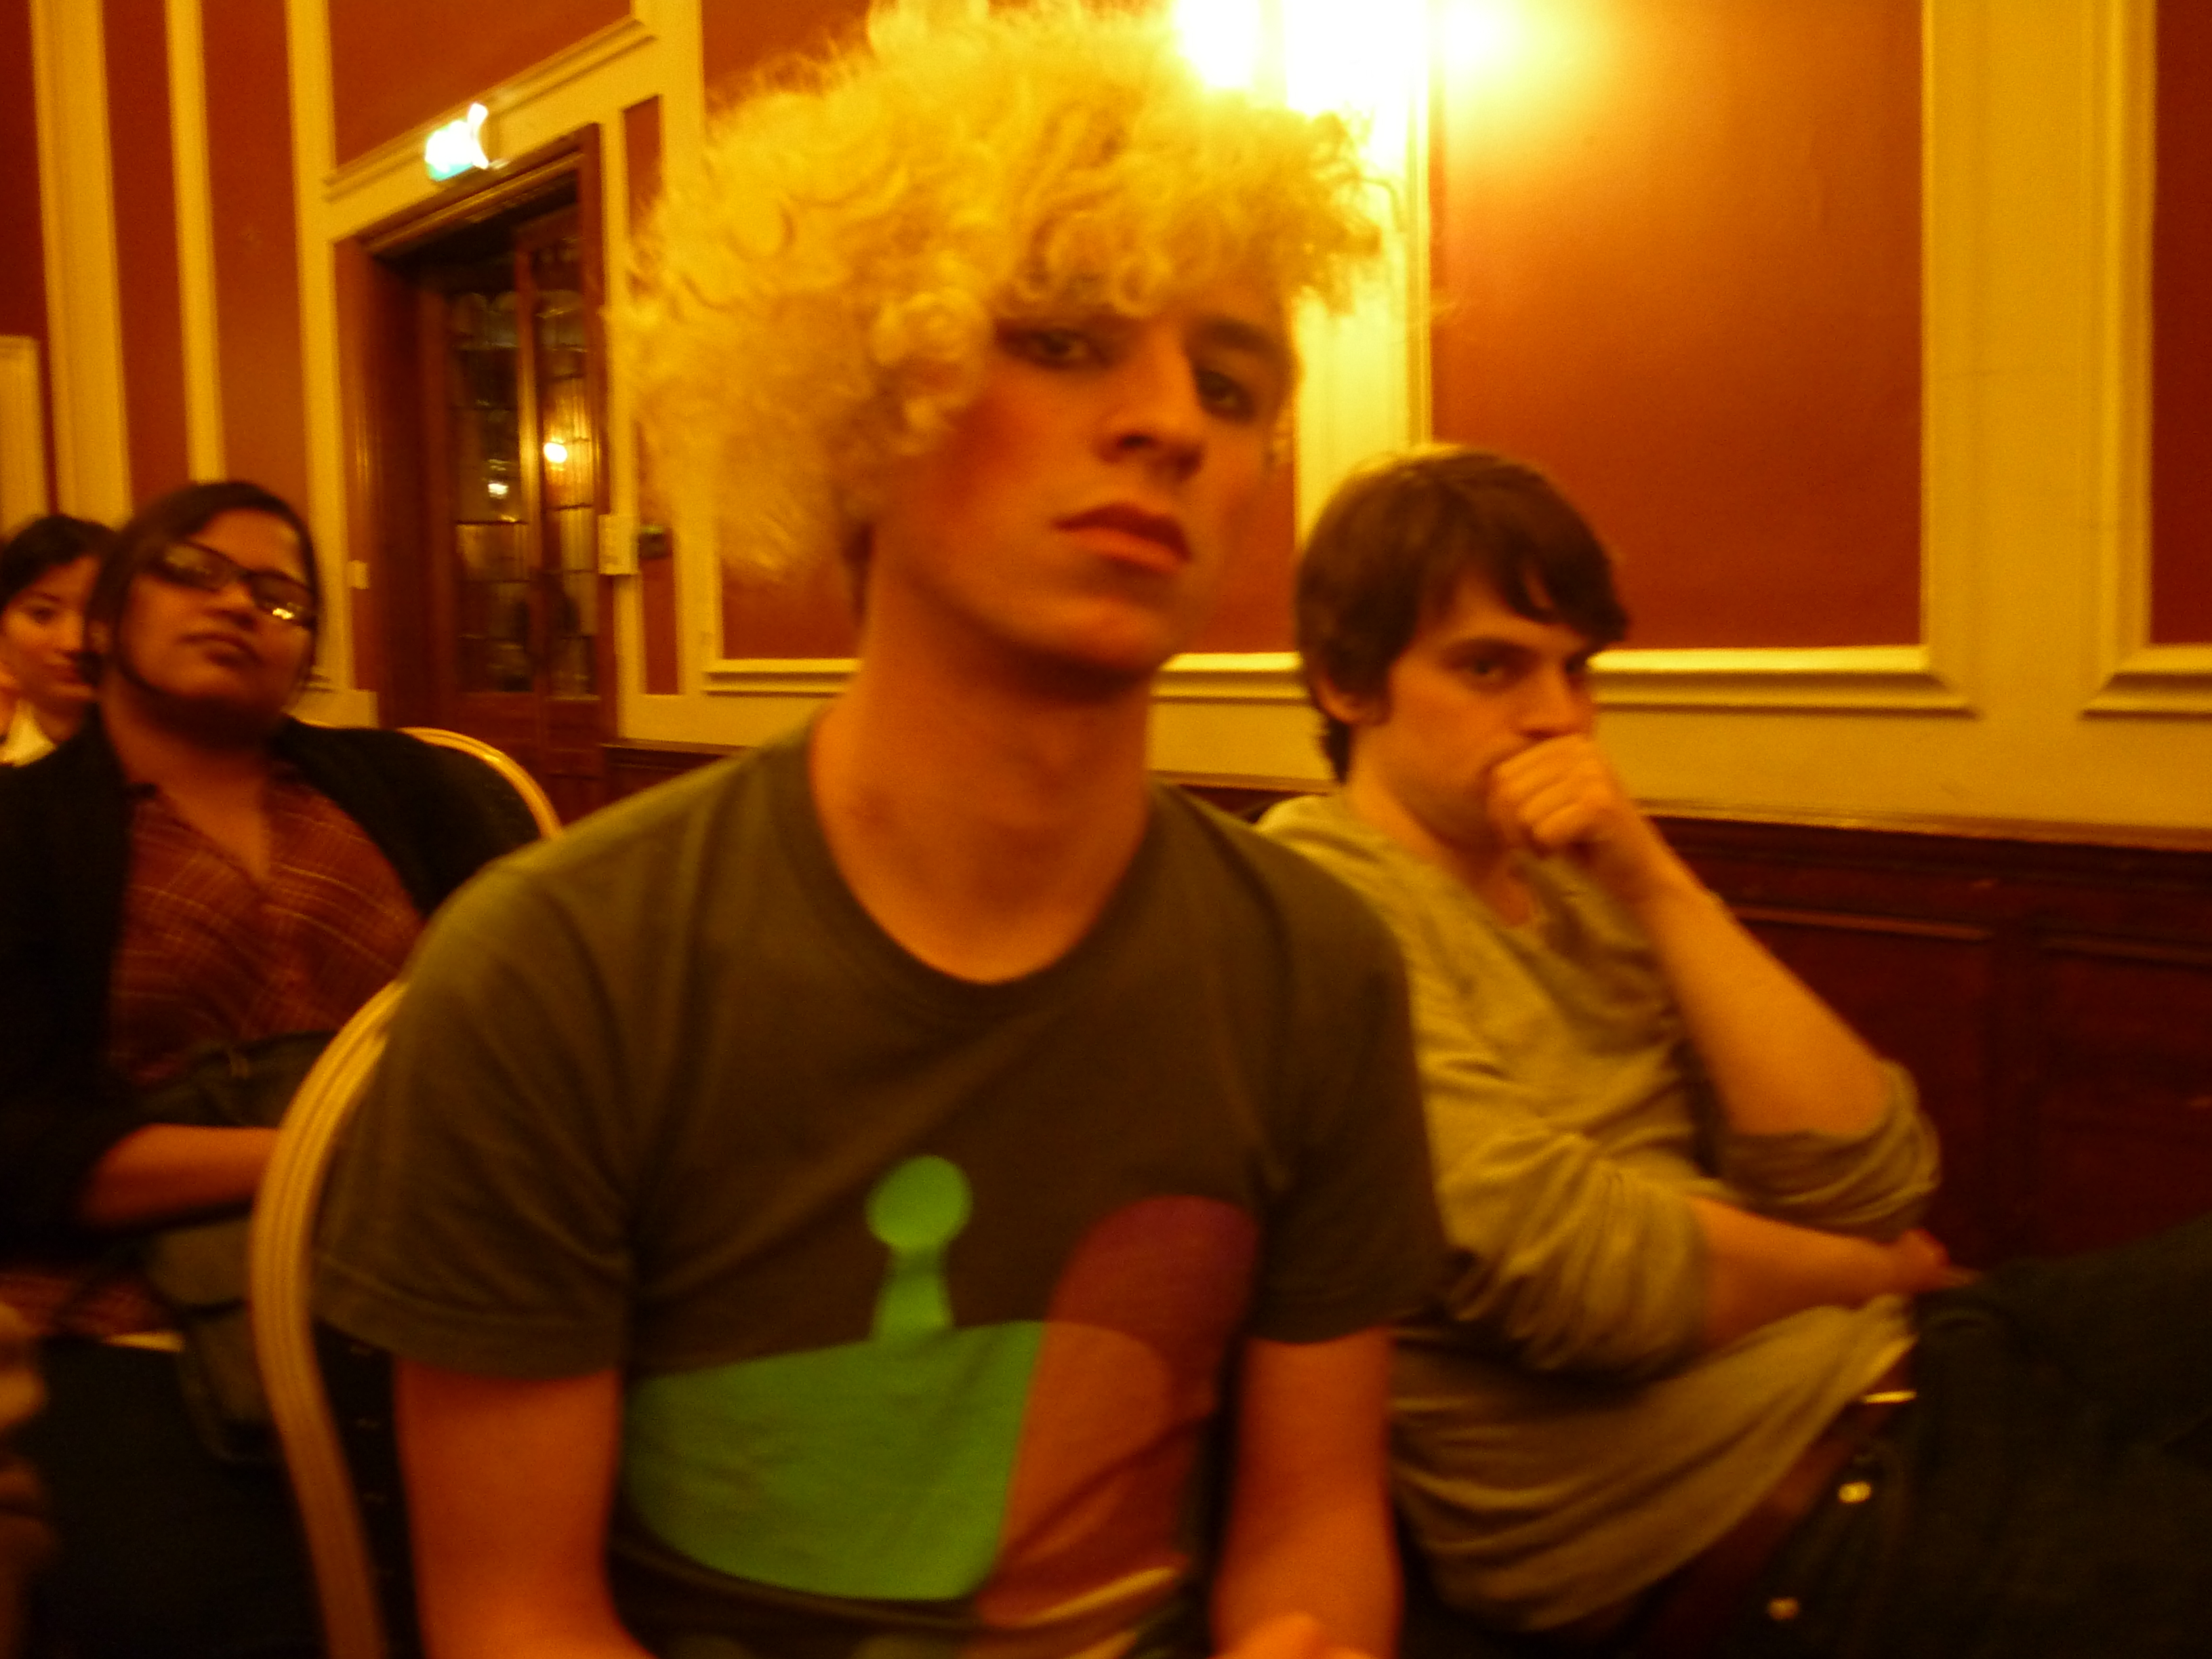 Photo taken at event. Young person, 20s, looks into camera with attitude and a look of defiance. Wearing T-shirt and with a mop of dyed blonde, curly hair. A second young person sits behind. Hand covering part of face. Looks sideways into camera